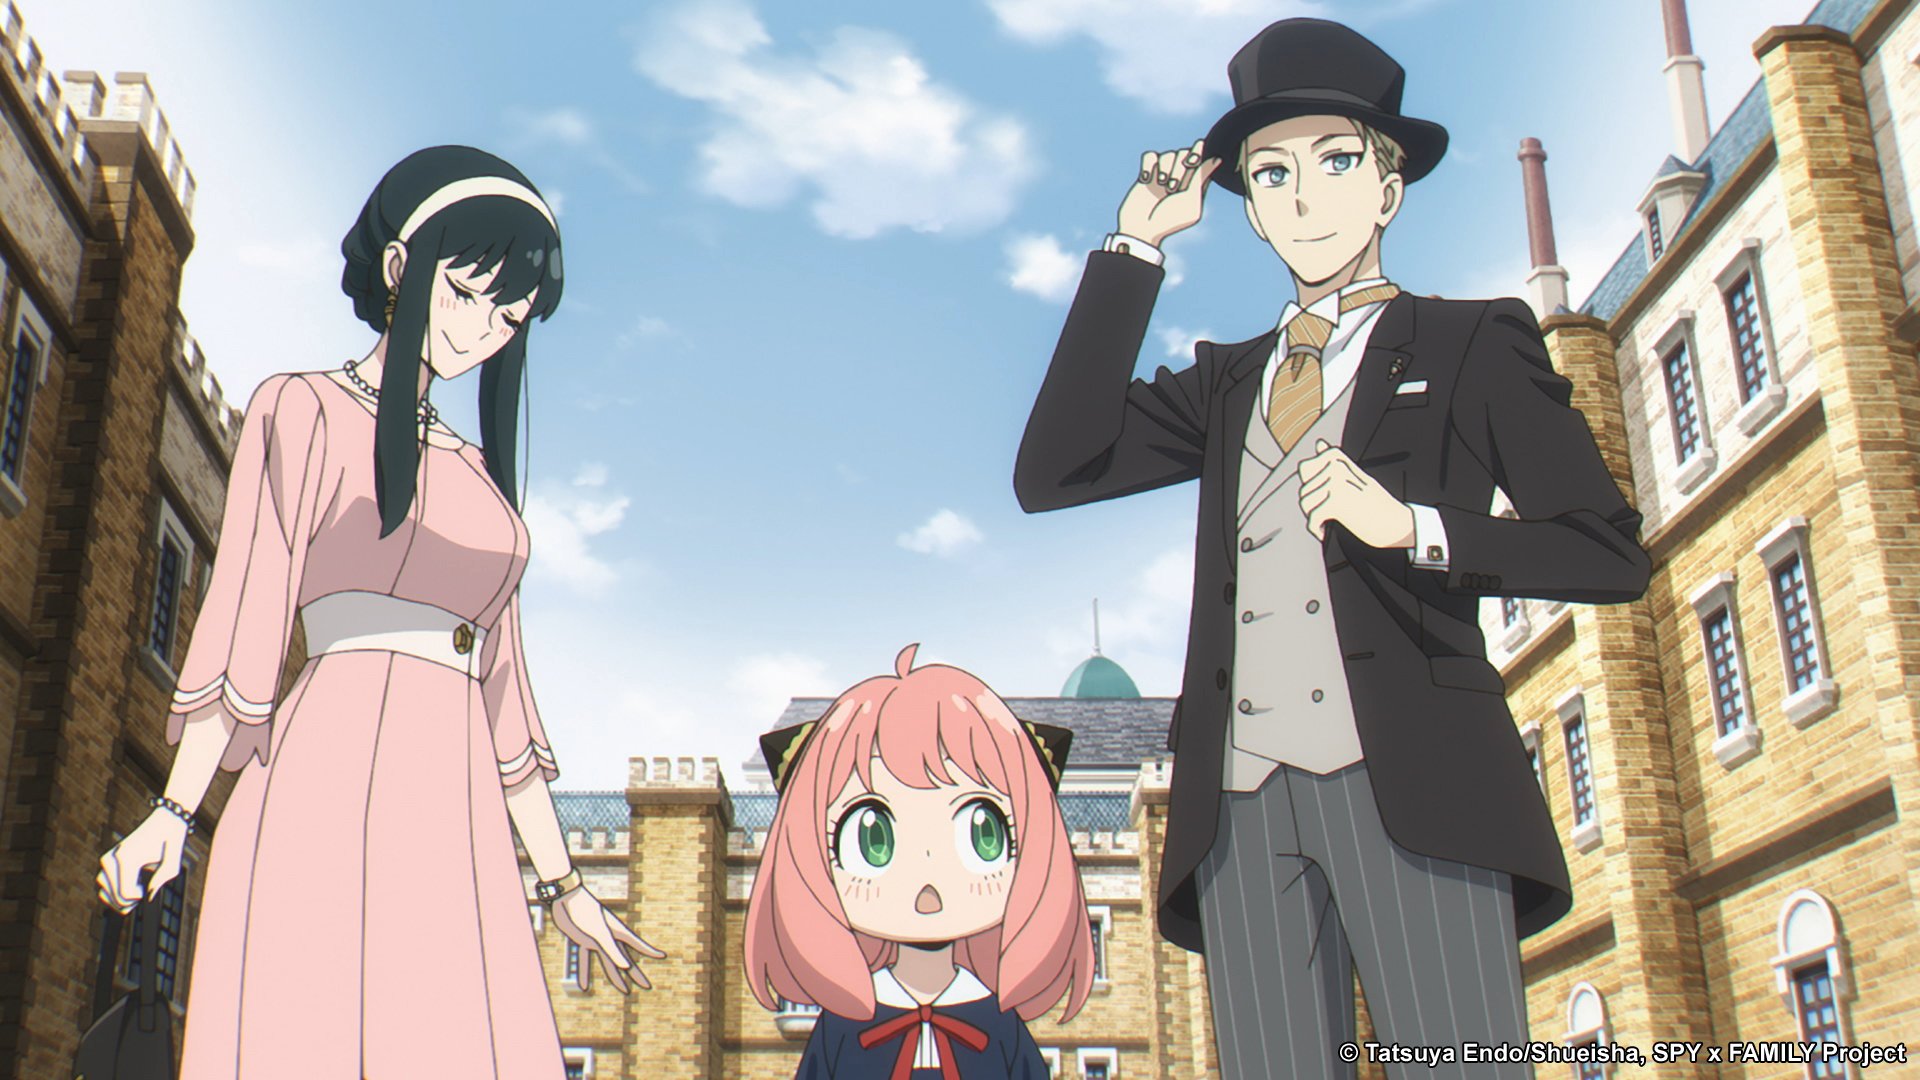 Spy x Family: Learn All About the Popular Anime and Where to Watch it